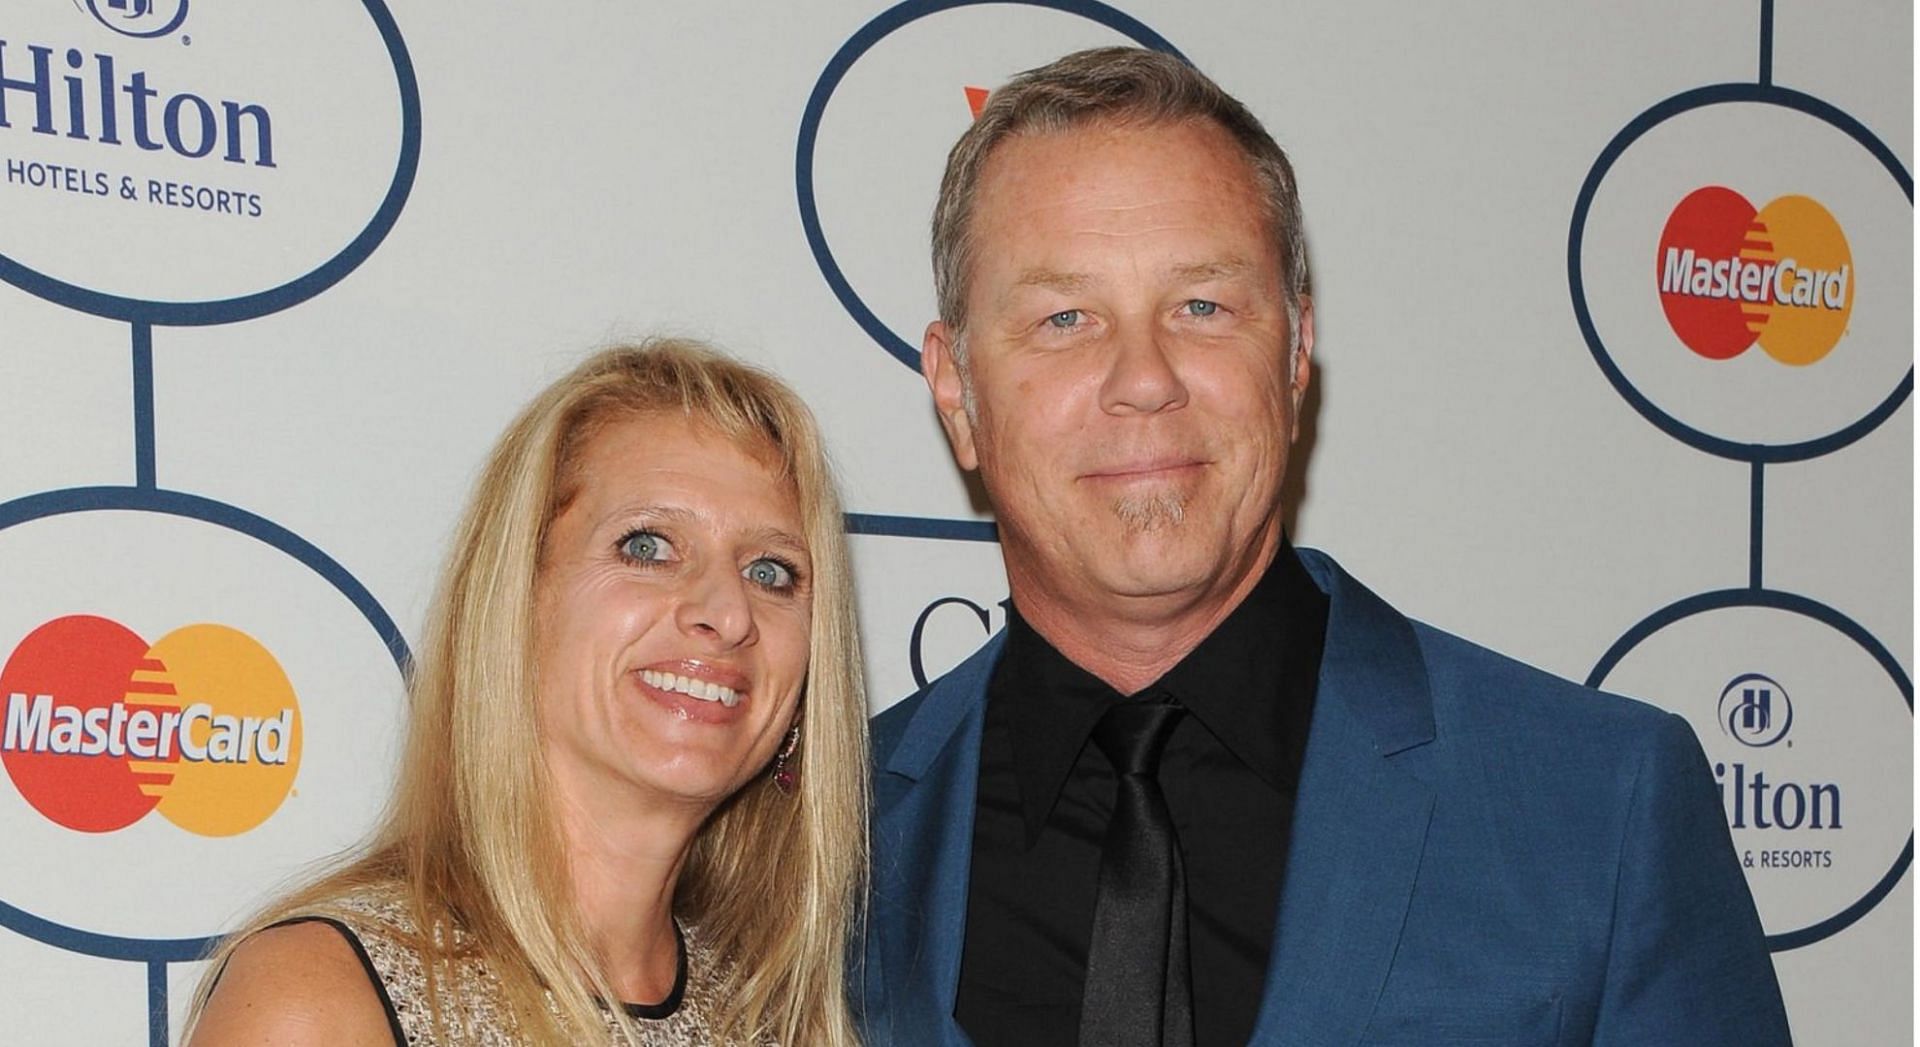 Metallica frontman James Hetfield has reportedly filed for divorce from his wife of 25 years Francesca Hetfield (Image via Getty Images)